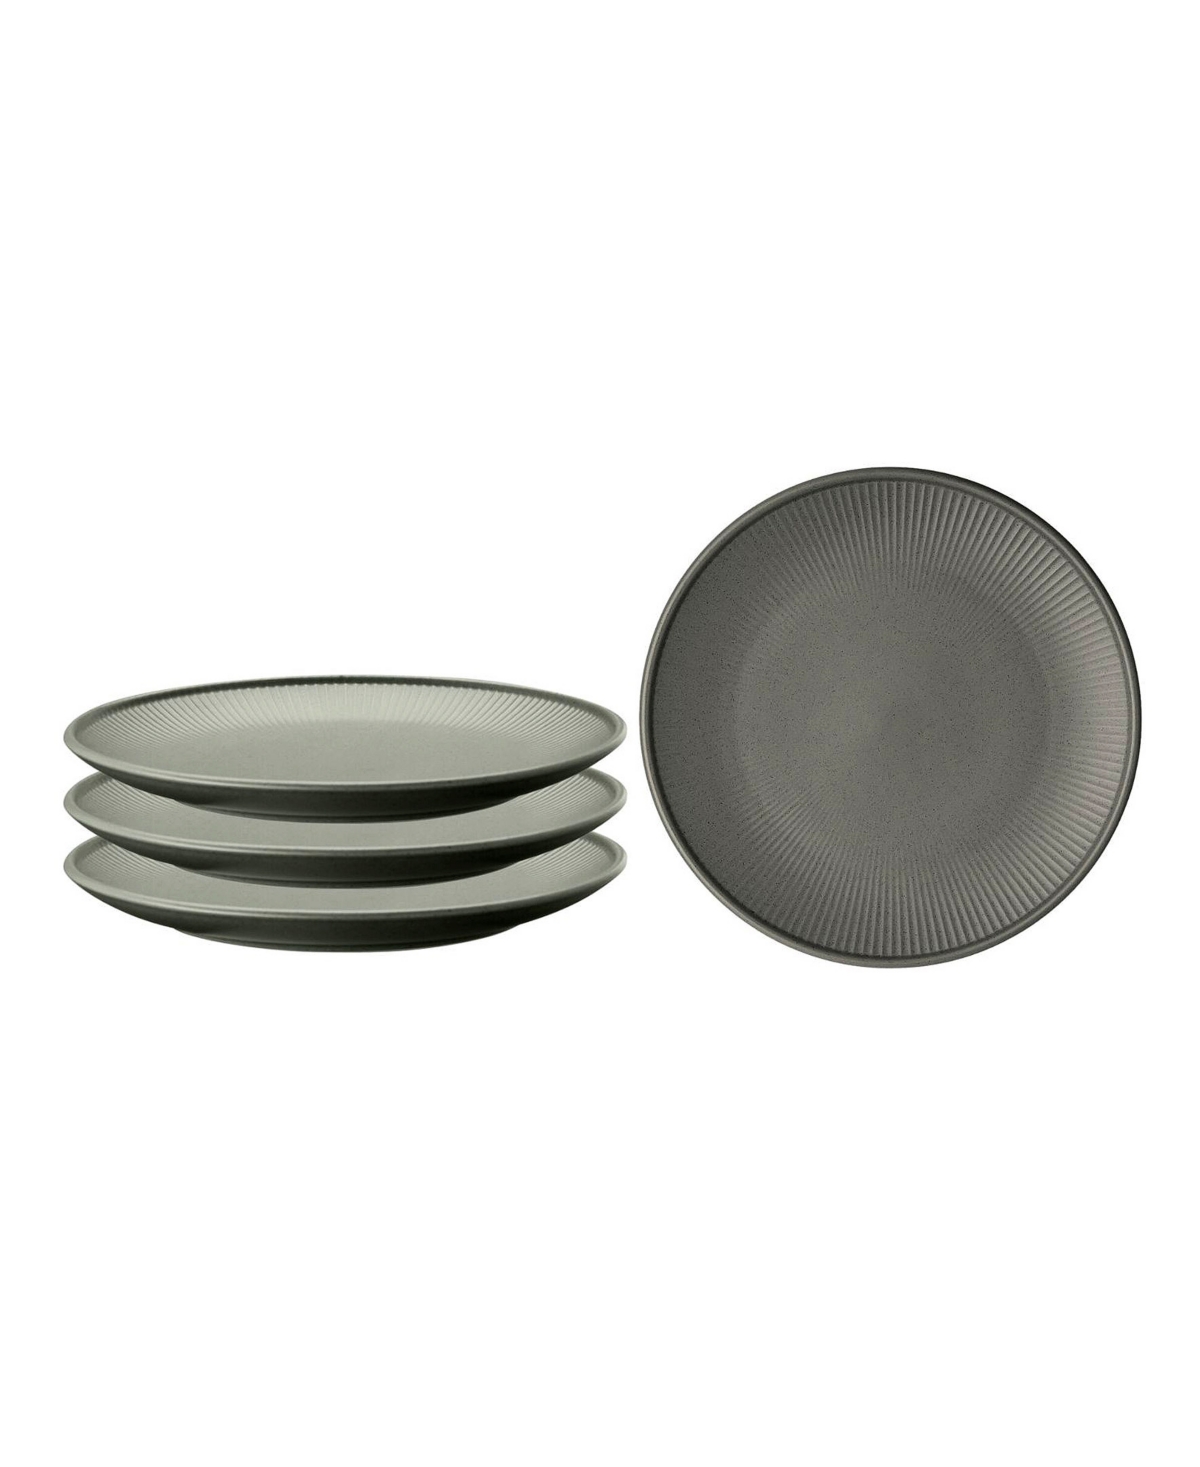 Clay Set of 4 Dinner Plates, Service for 4 - Gray